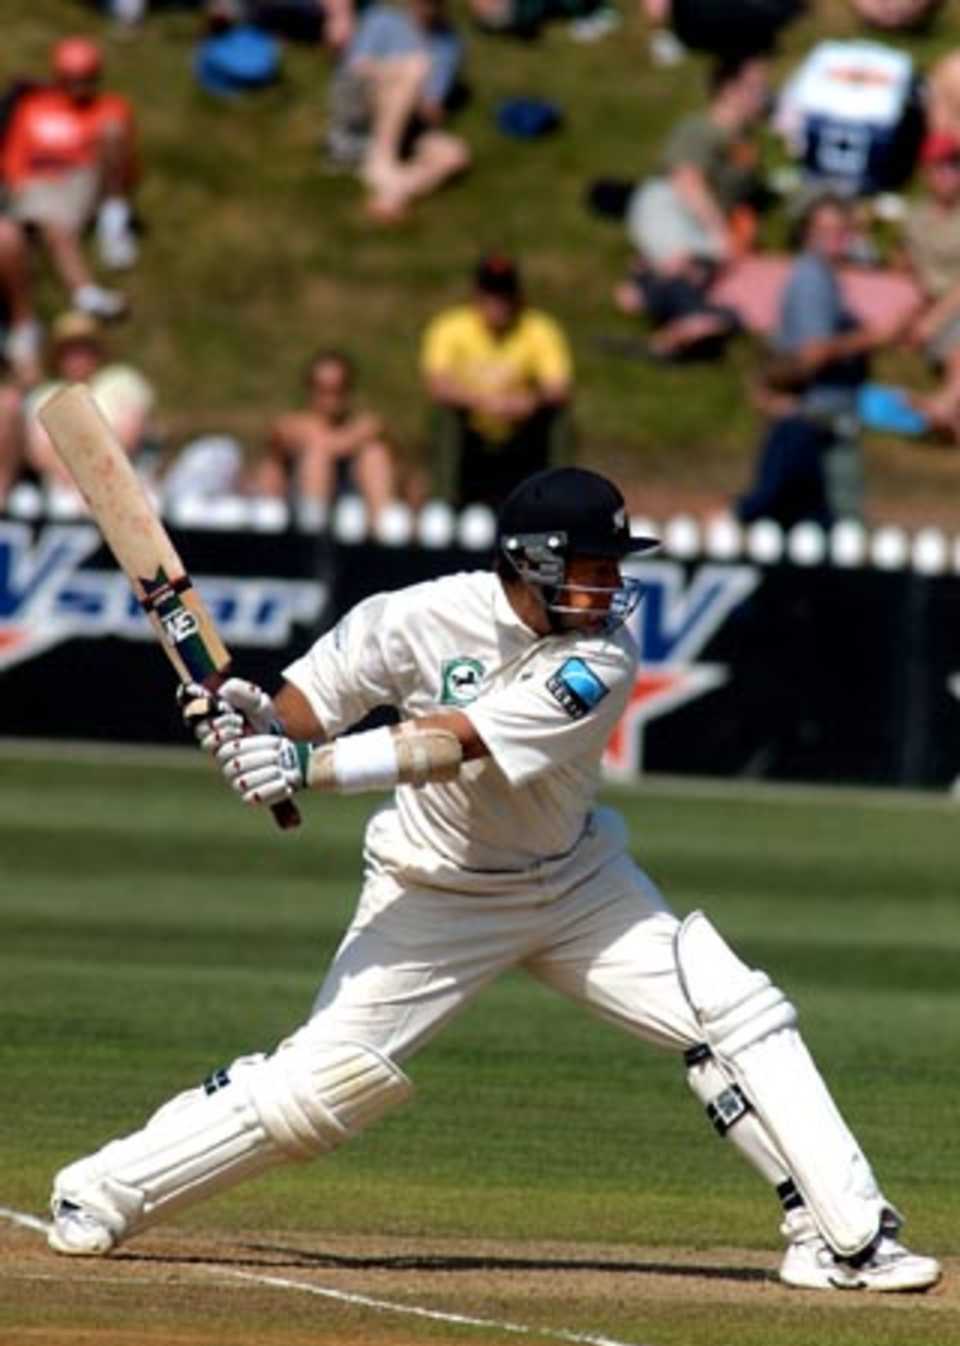 McMillan at full stretch about to drive a delivery. 2nd Test: New Zealand v Bangladesh at Wellington, 26-30 Dec 2001